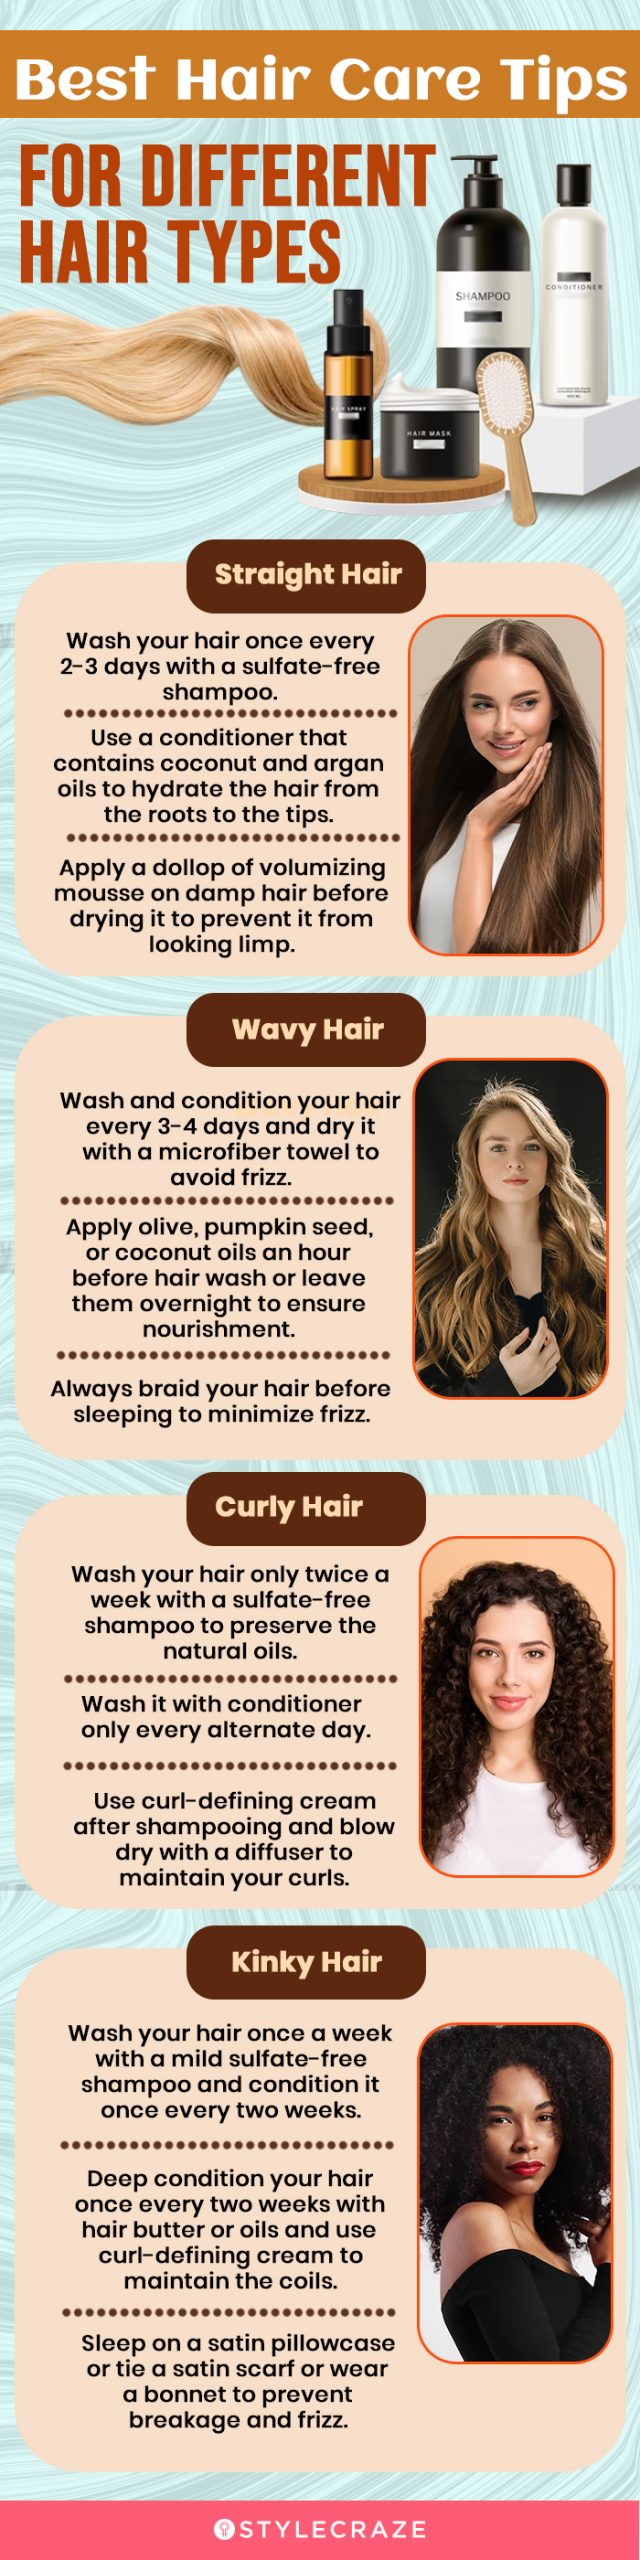 Daily hair washing: Recommendations and alternatives